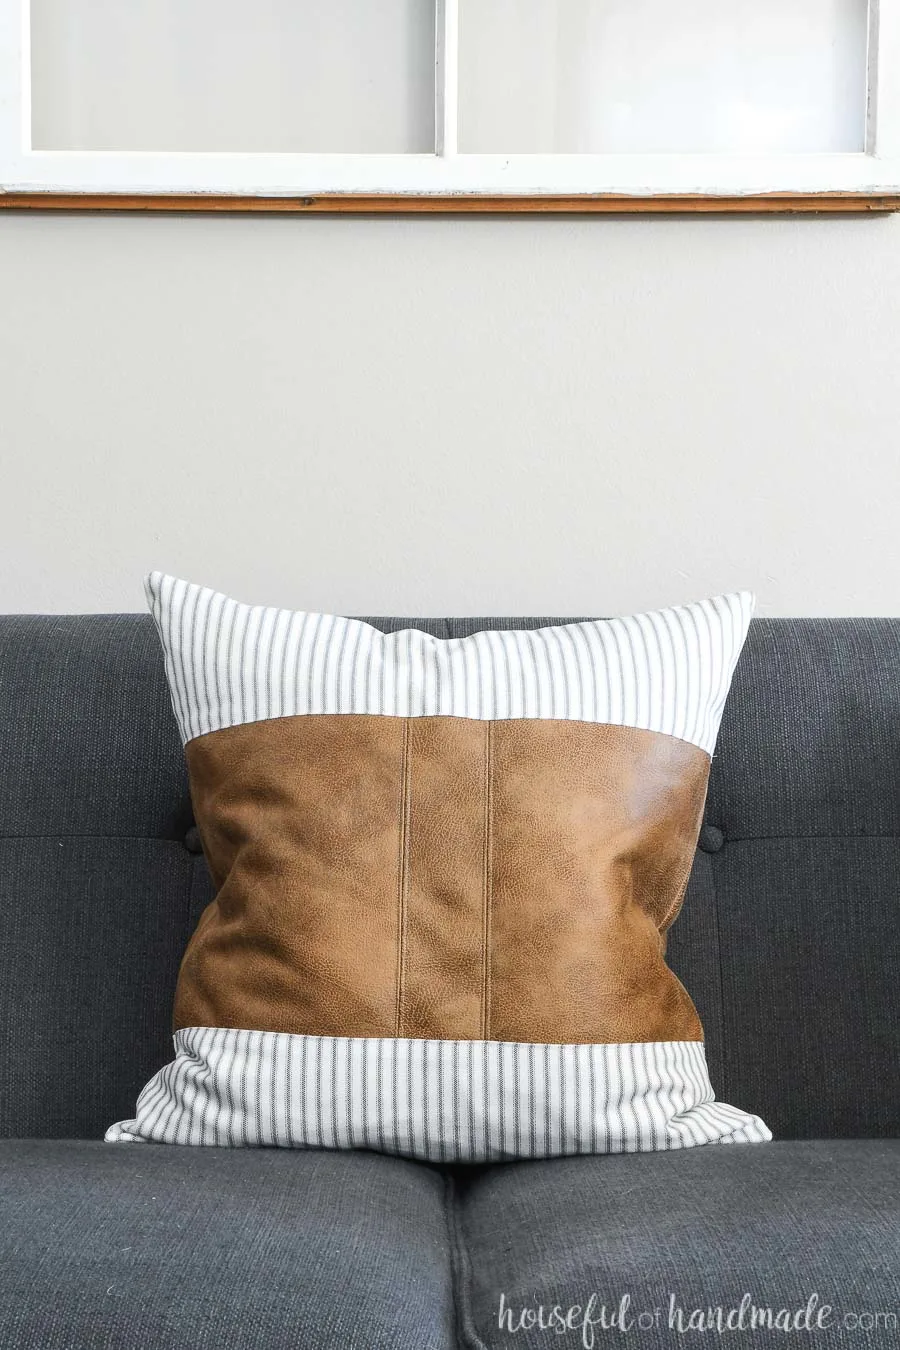 Decorative Leather Throw Pillows, Large Leather Pillows